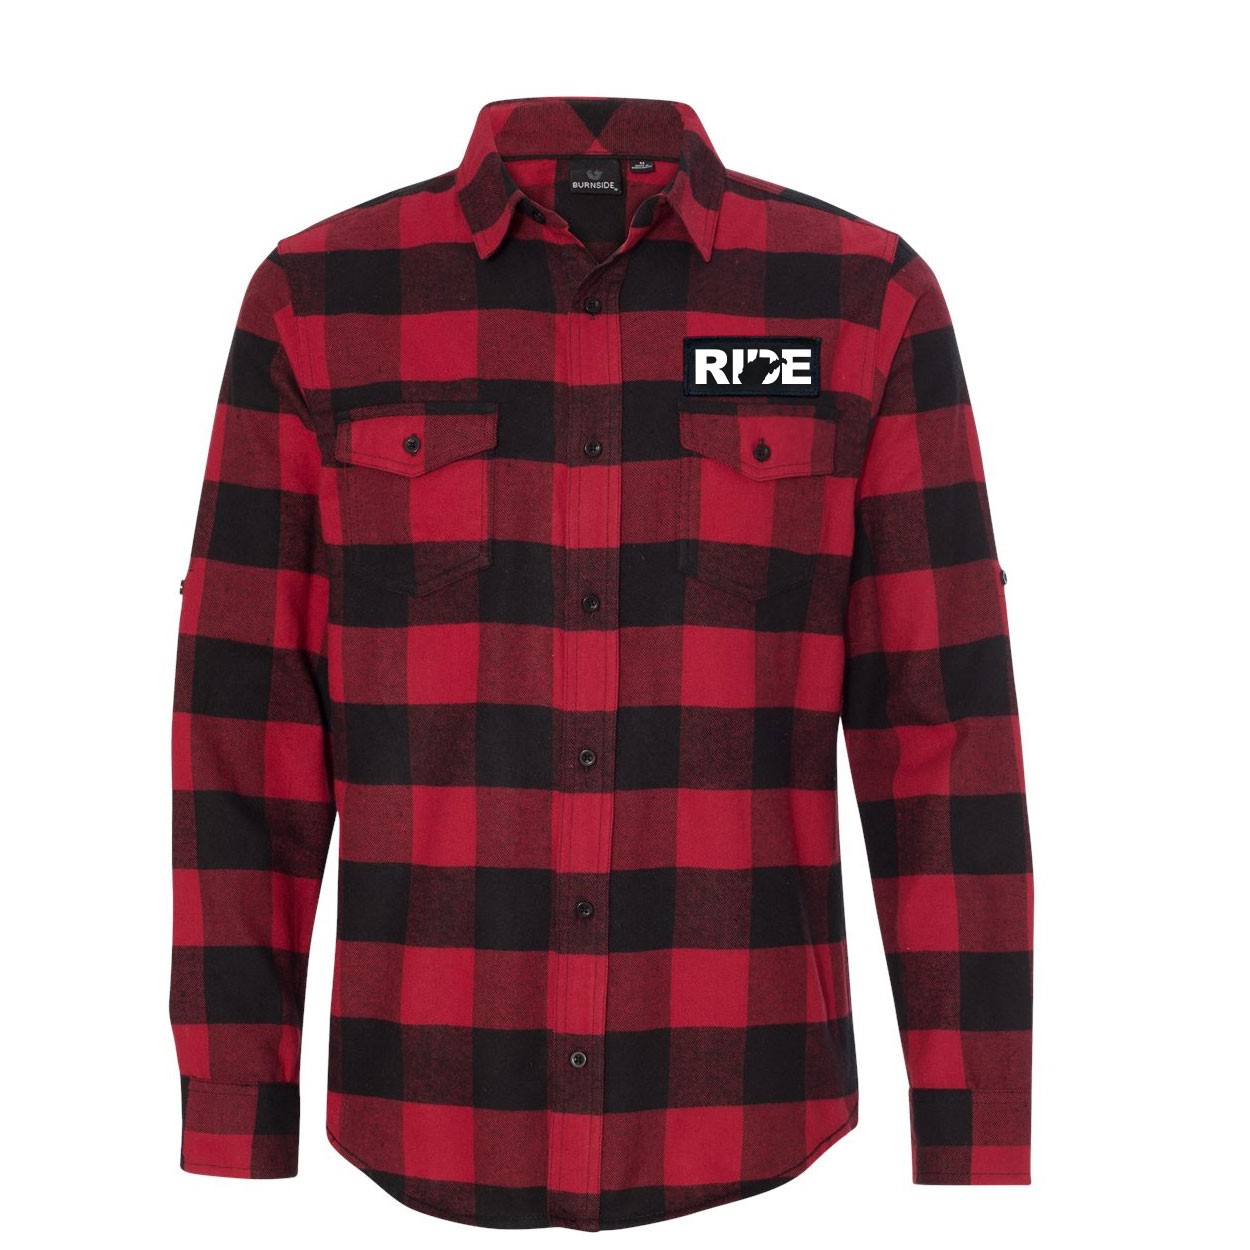 Ride West Virginia Classic Unisex Long Sleeve Woven Patch Flannel Shirt Red/Black Buffalo (White Logo)